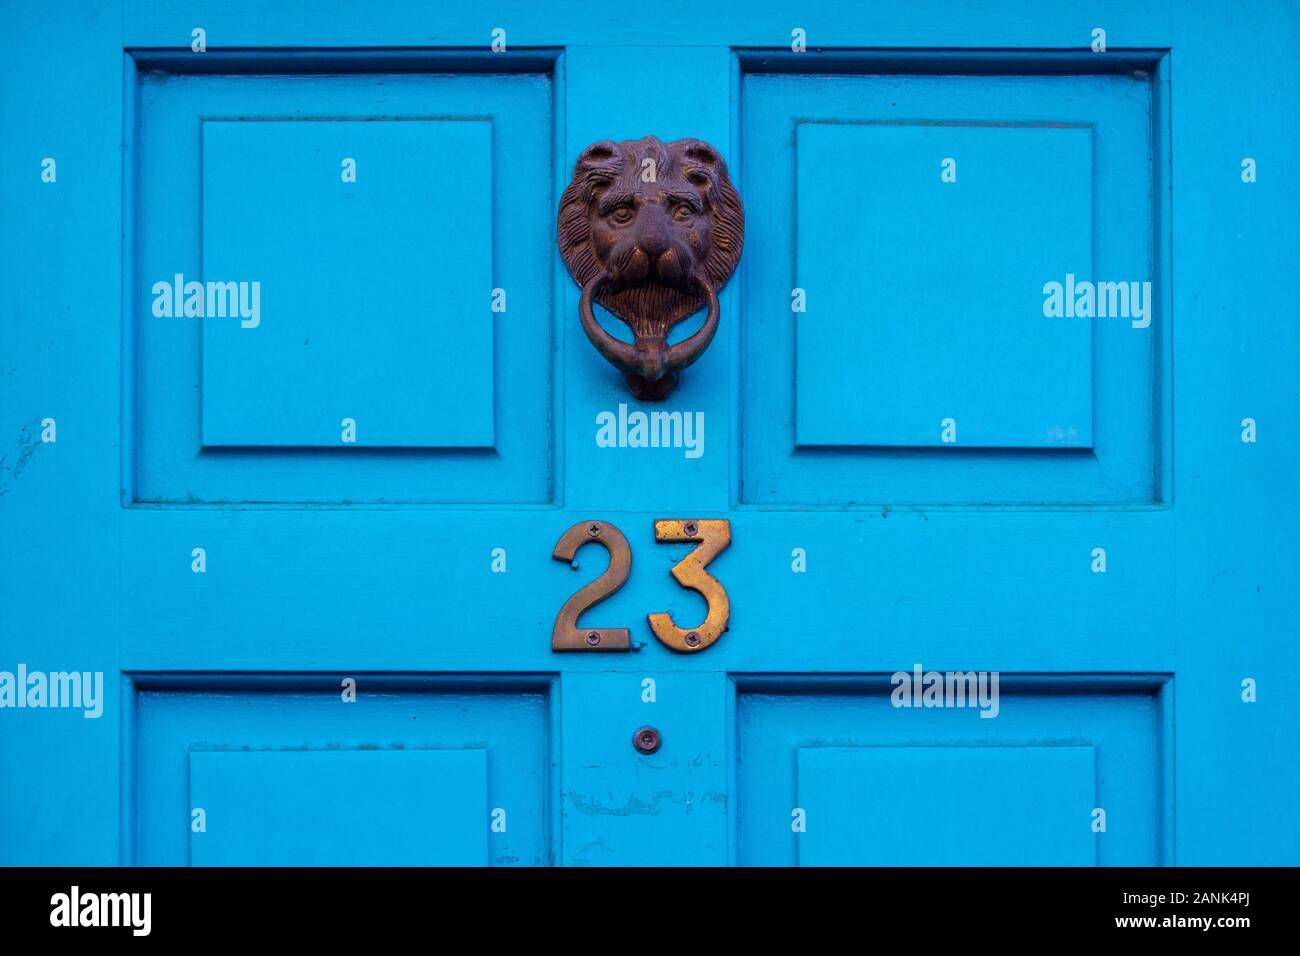 House number 23 with ornate lion's head door knocker Stock Photo